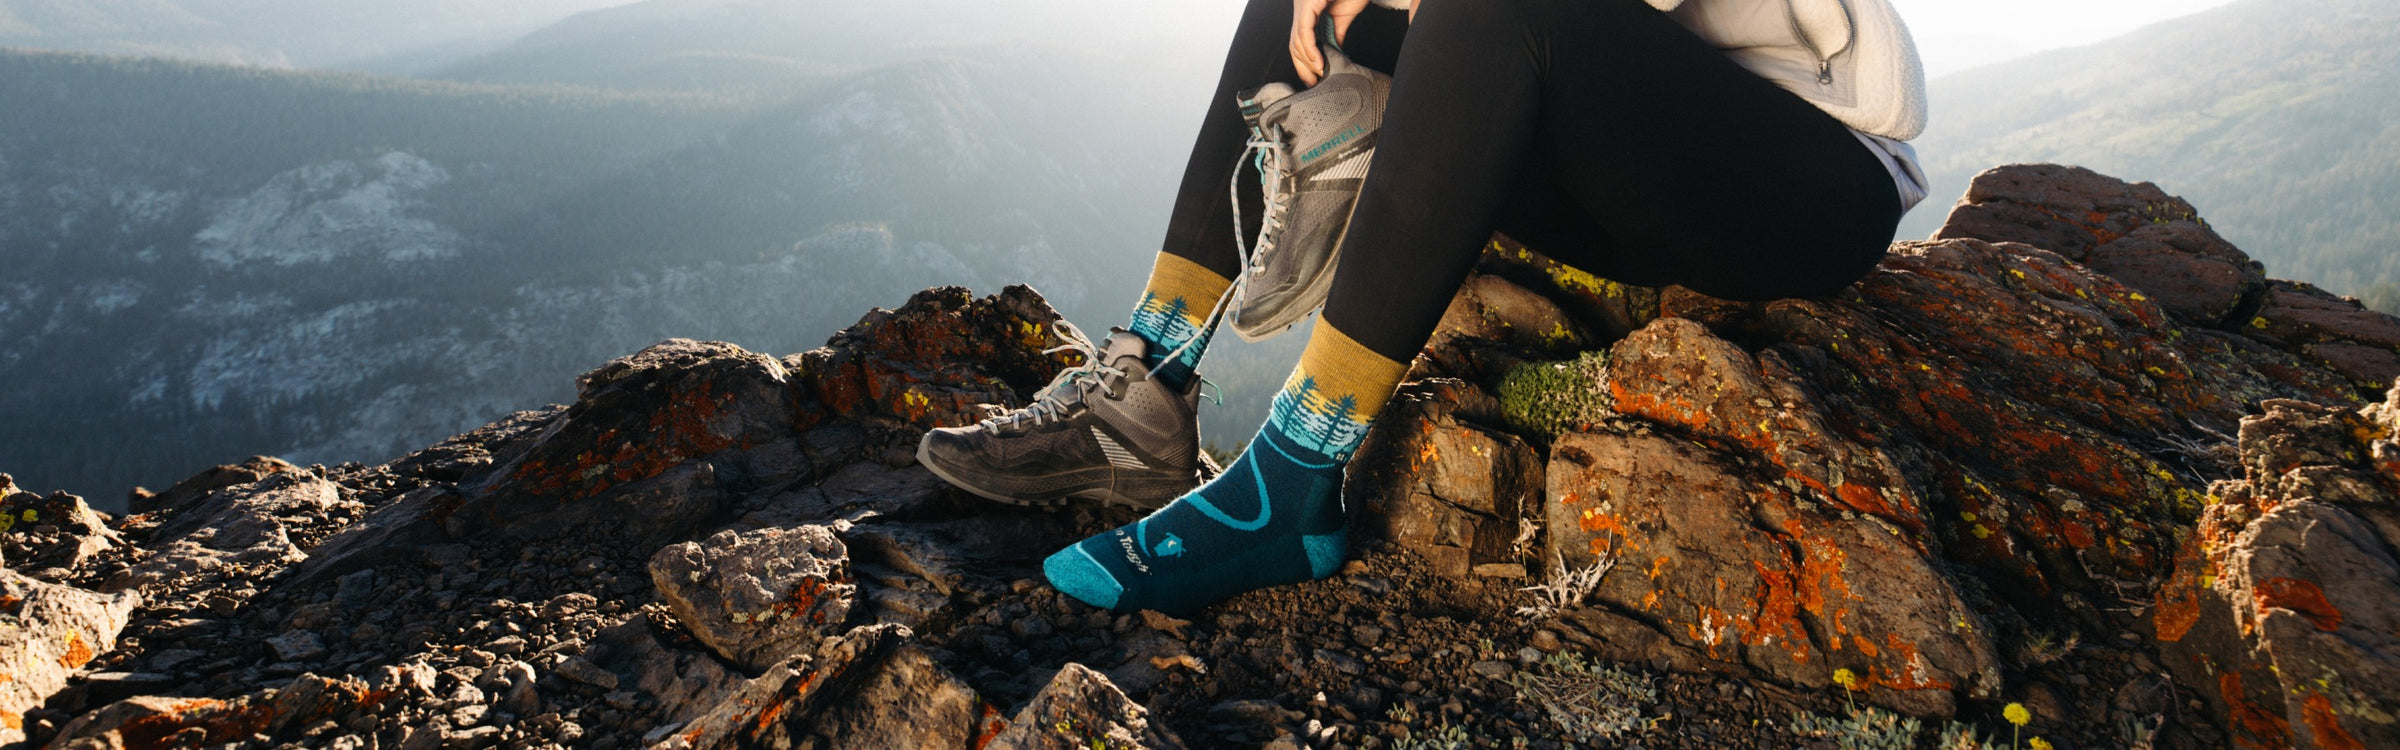 Hiker seated on a ridge line on a cold day wearing darn tough hiking socks